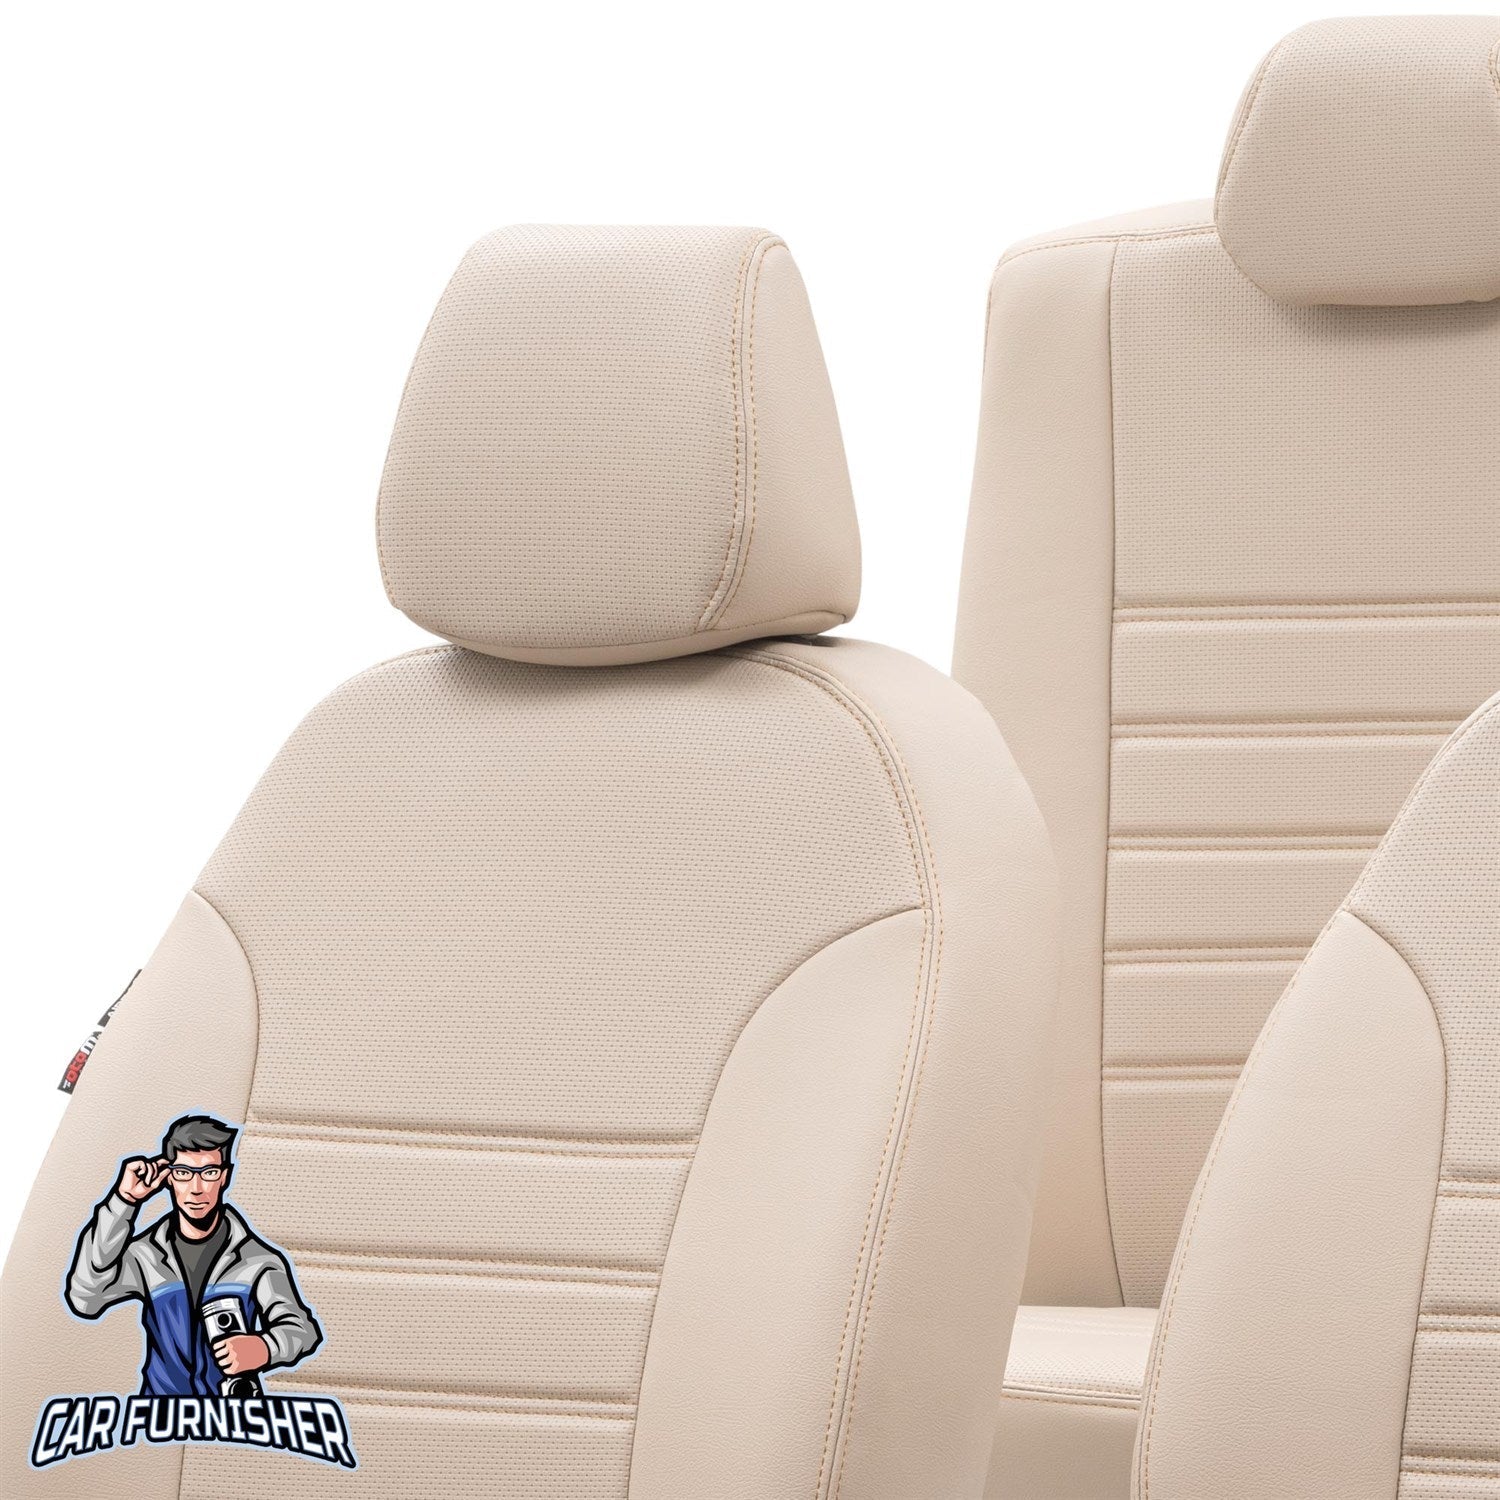 Renault 11 Seat Covers New York Leather Design Beige Leather